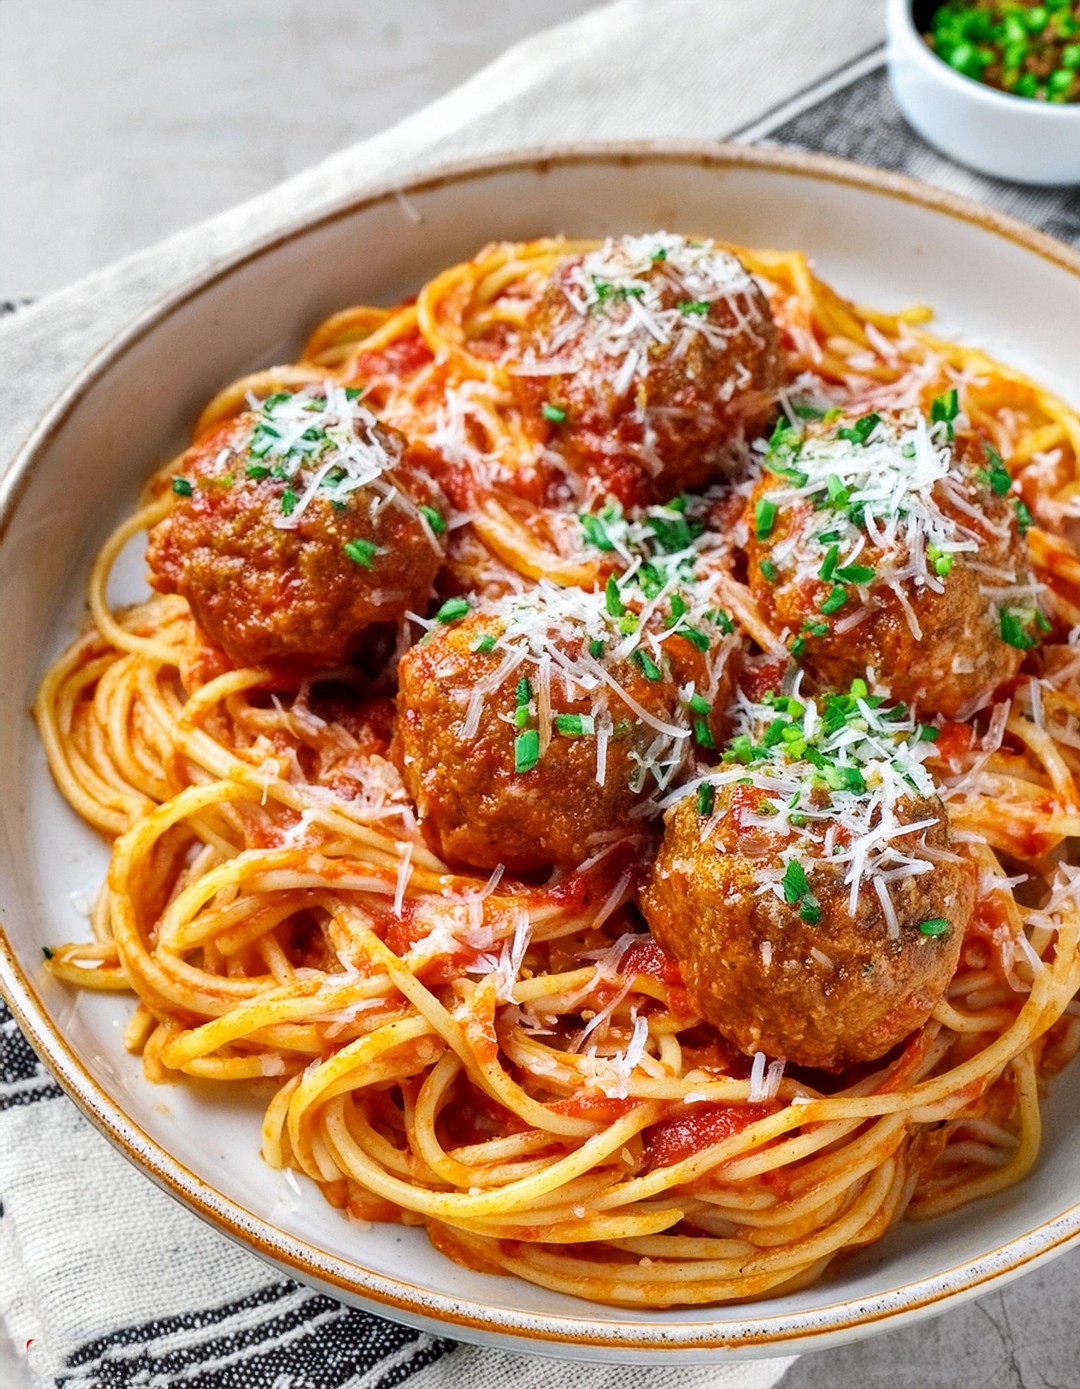 Melt-In-Your-Mouth Italian Meatballs